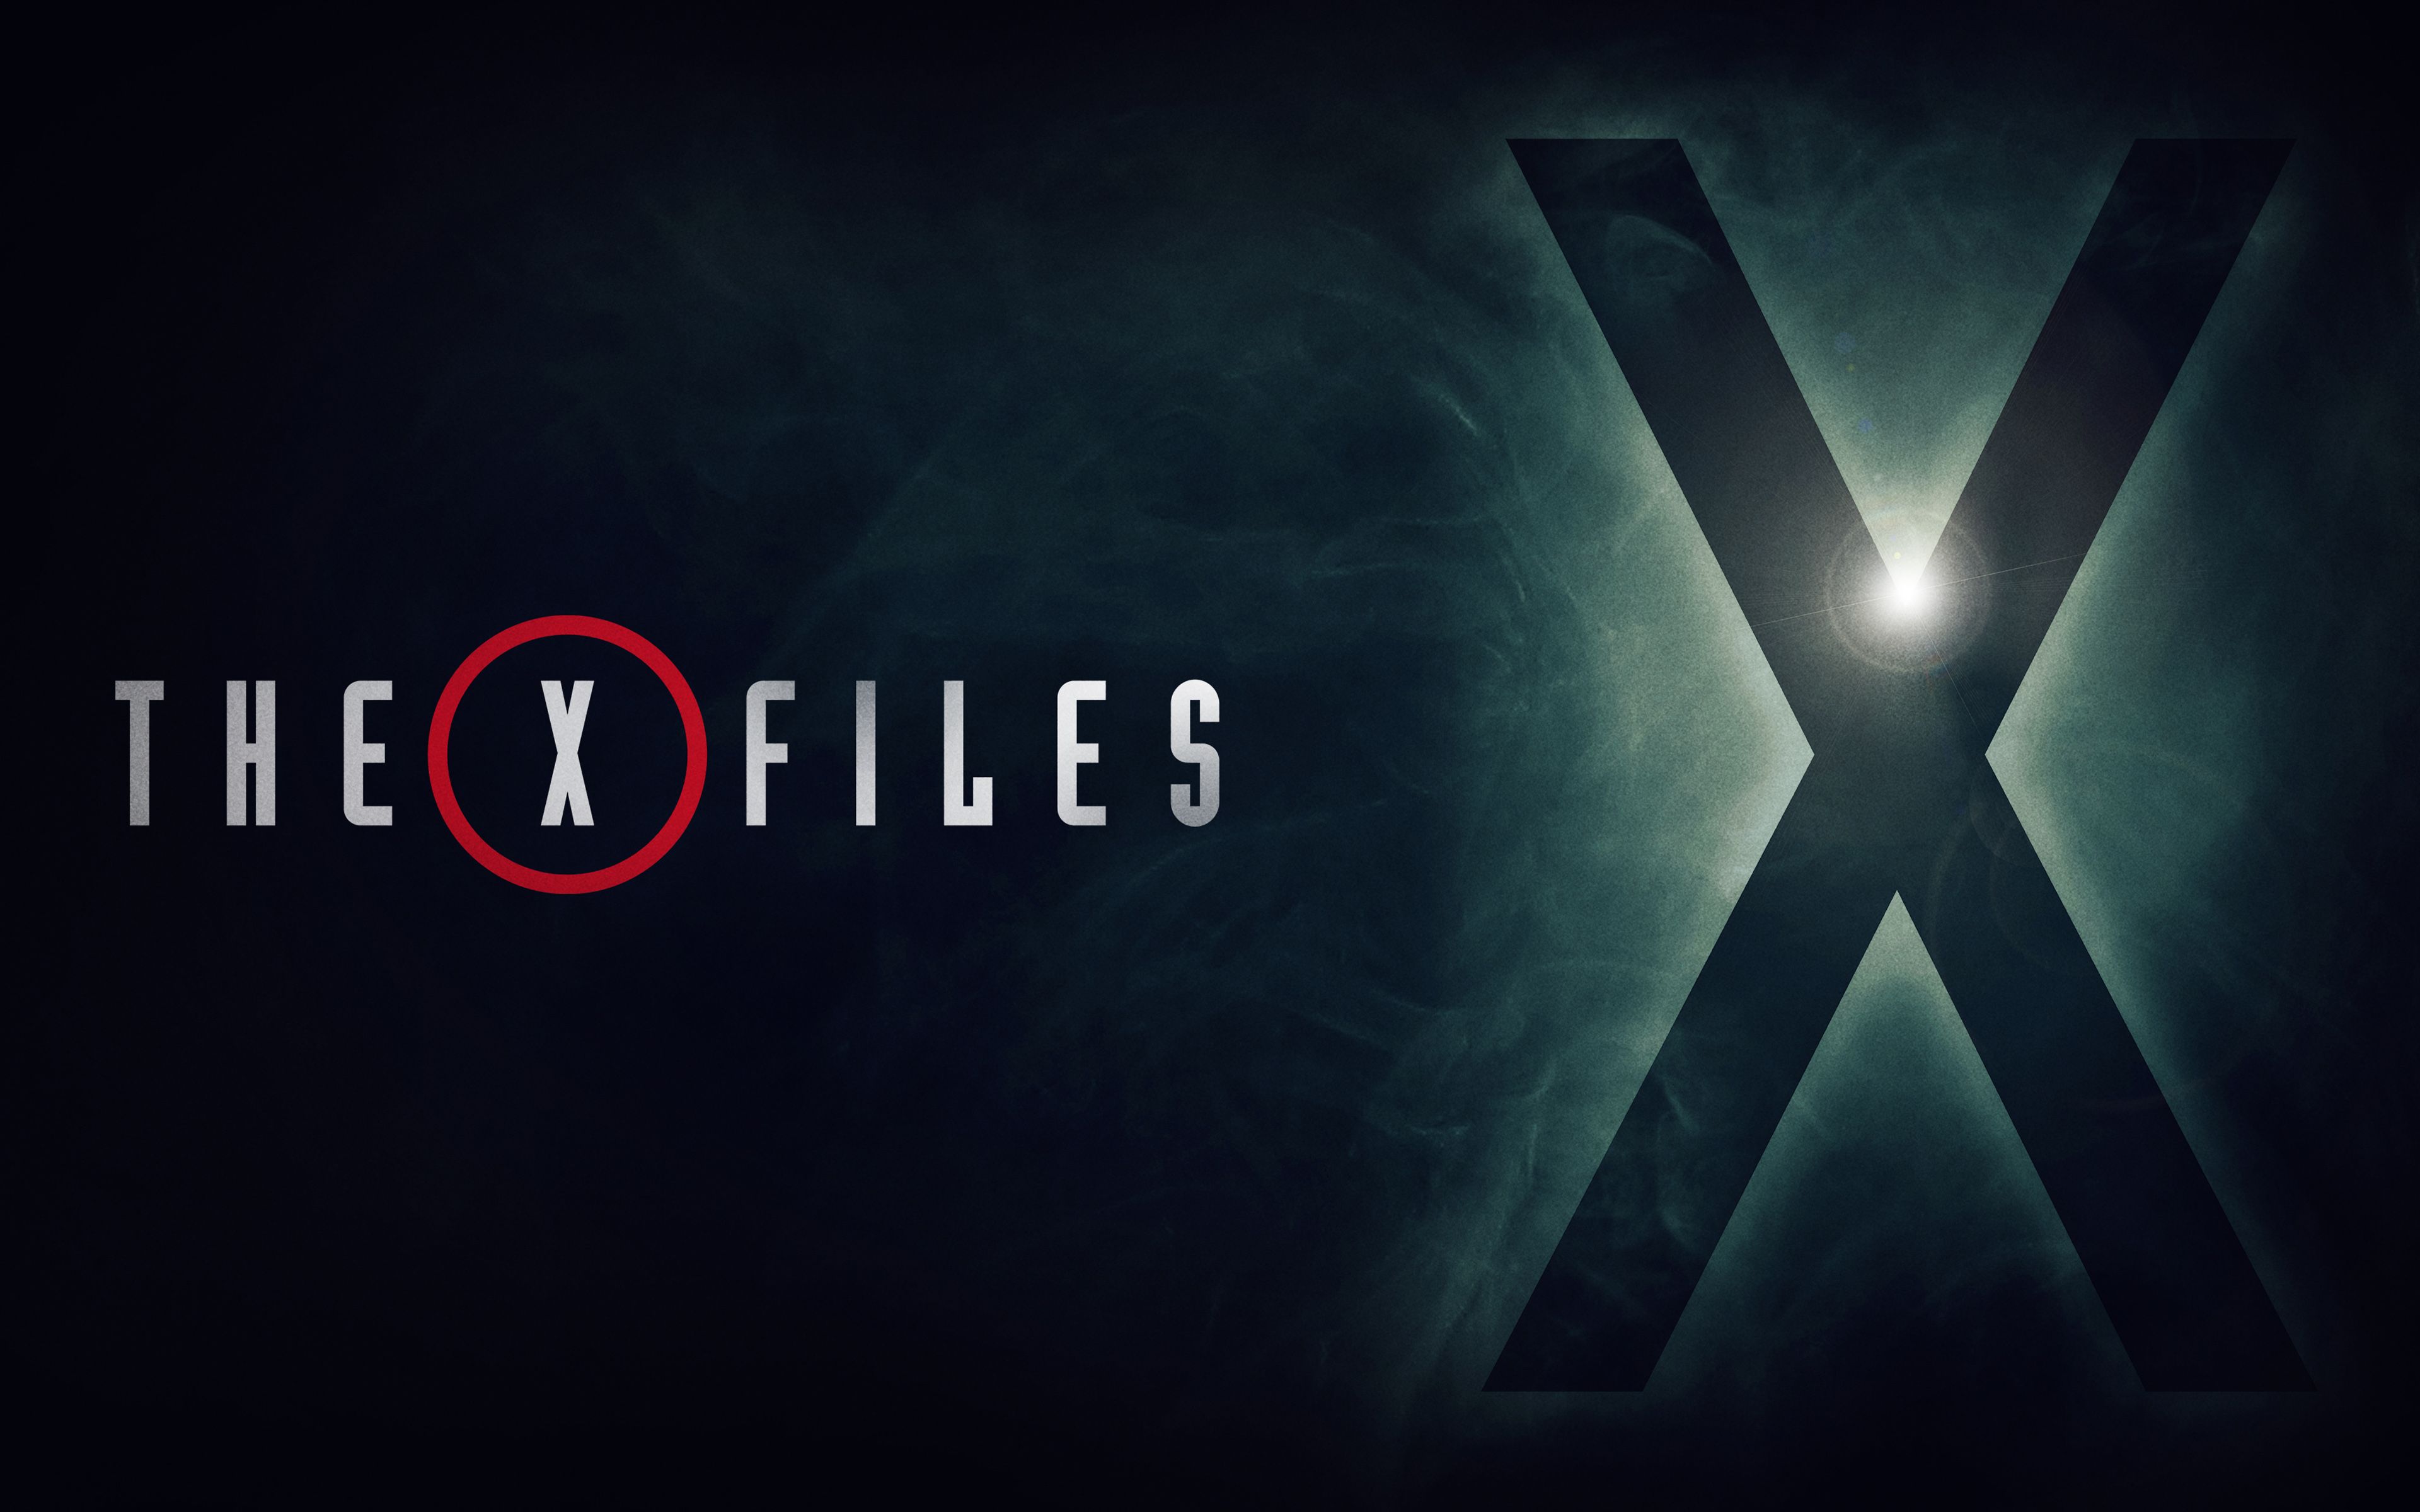 Download wallpaper The X Files, 4k, 11 season, new films, poster for desktop with resolution 3840x2400. High Quality HD picture wallpaper